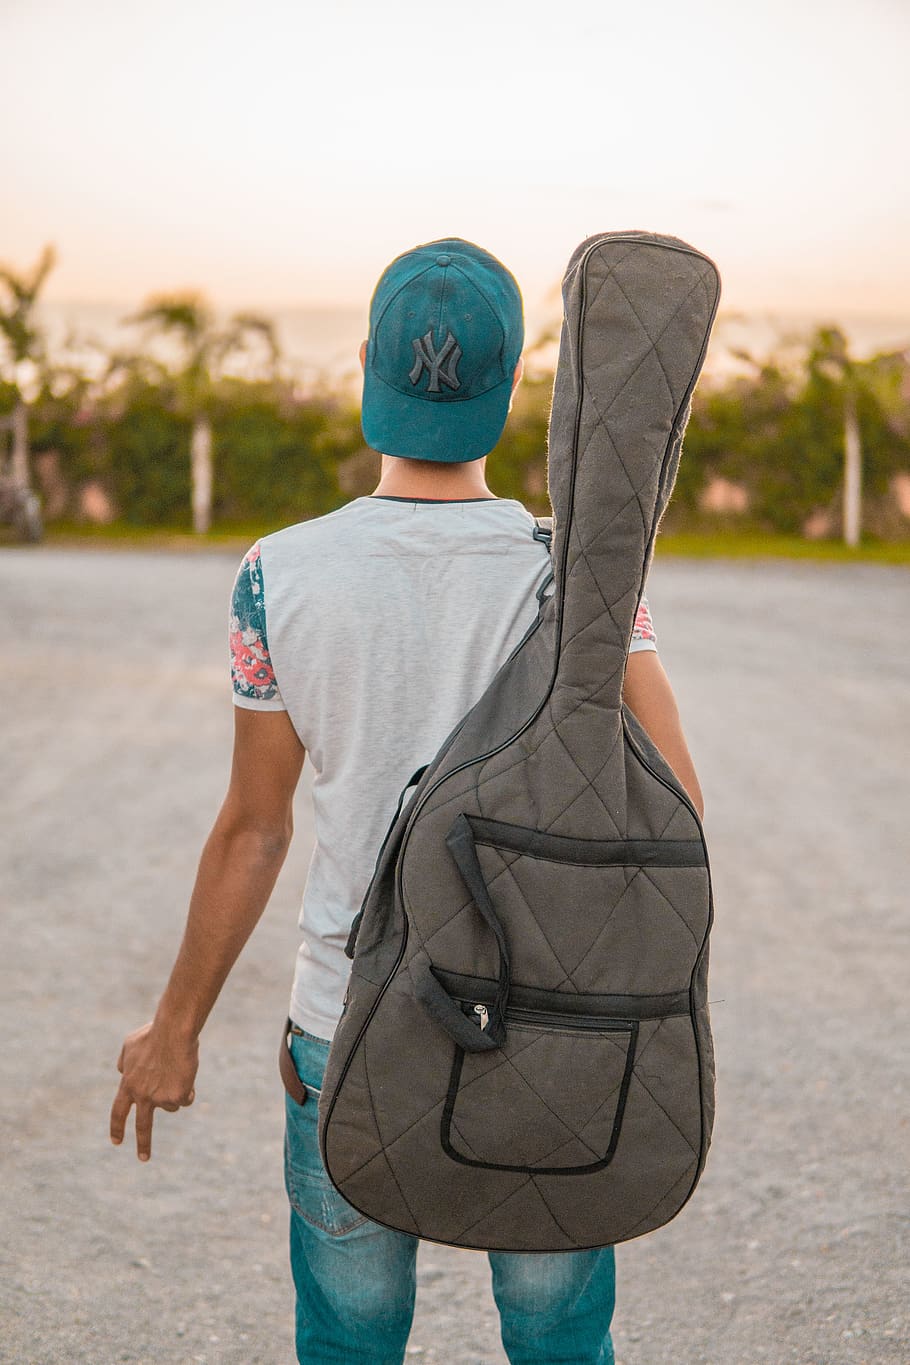 man looking at green trees carrying grey guitar case, person